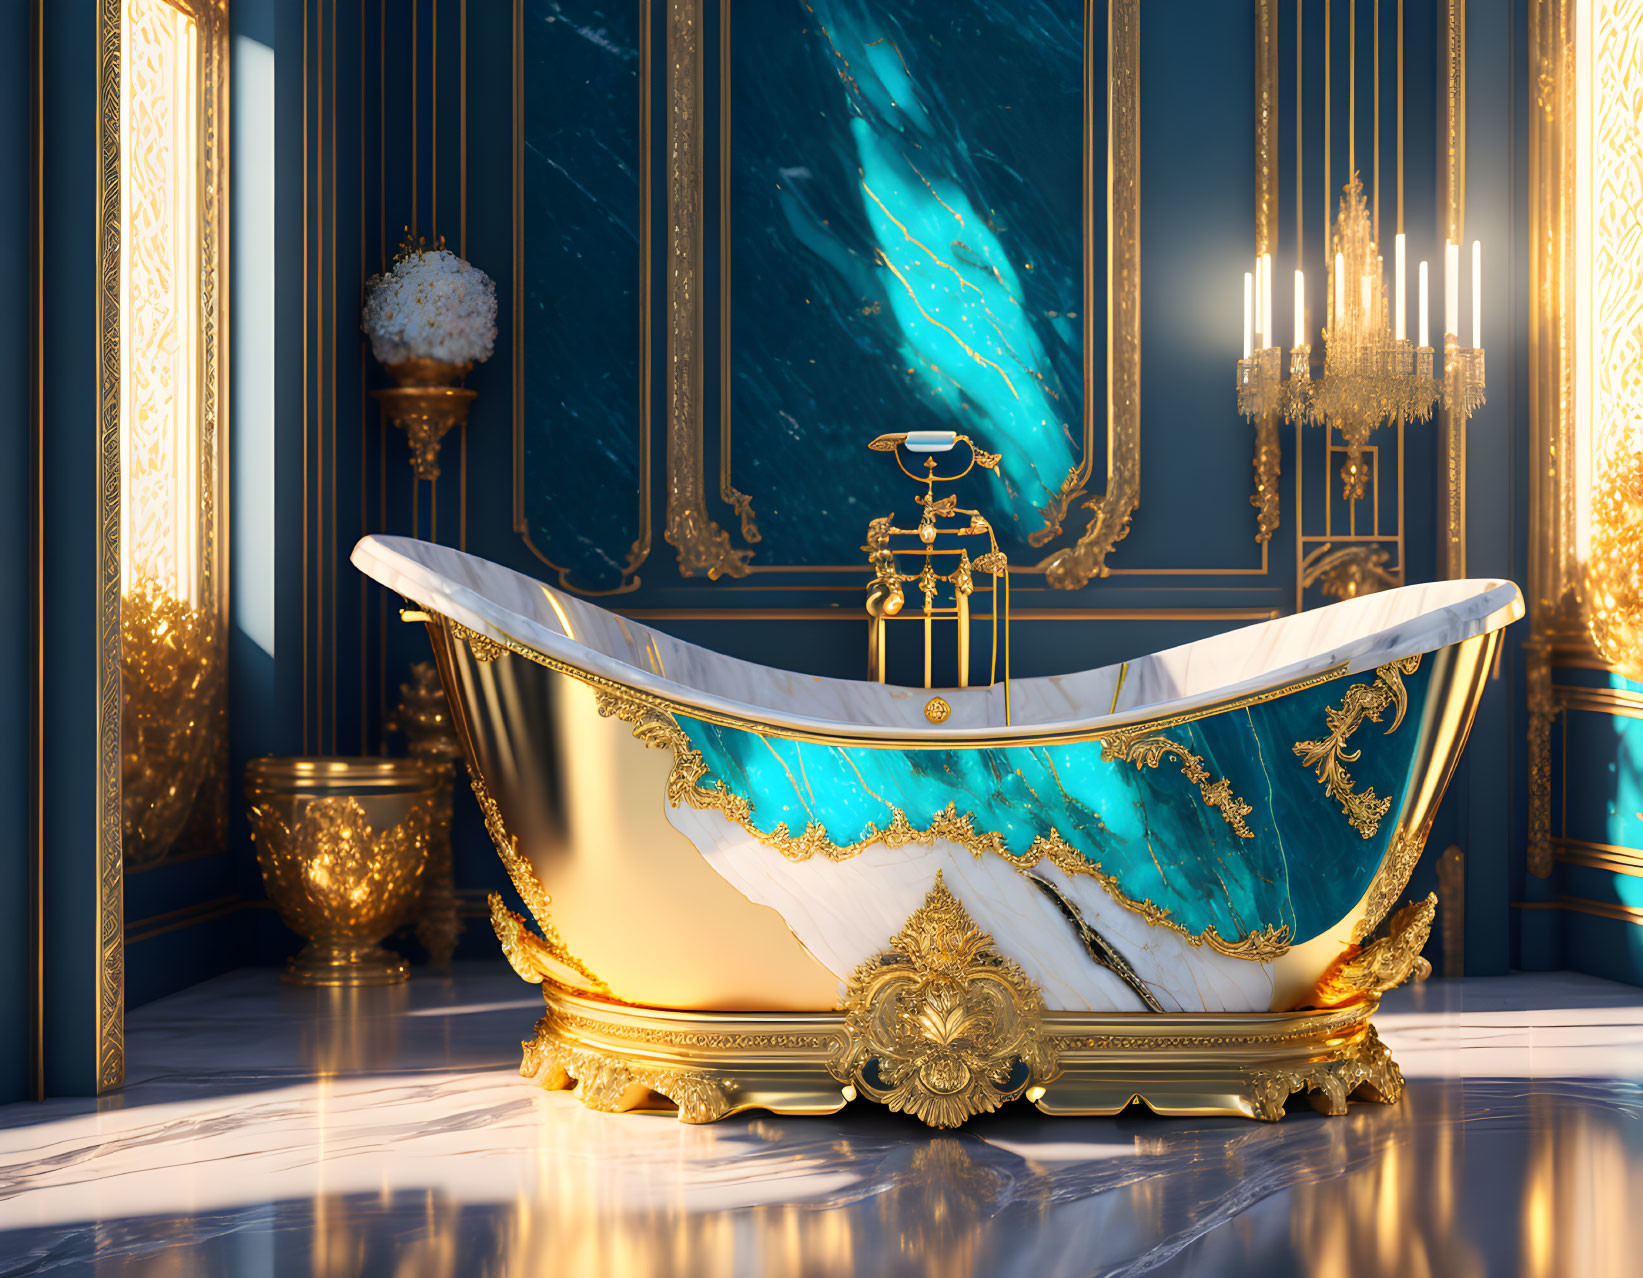 Opulent bathroom with golden claw-foot bathtub and marble floors